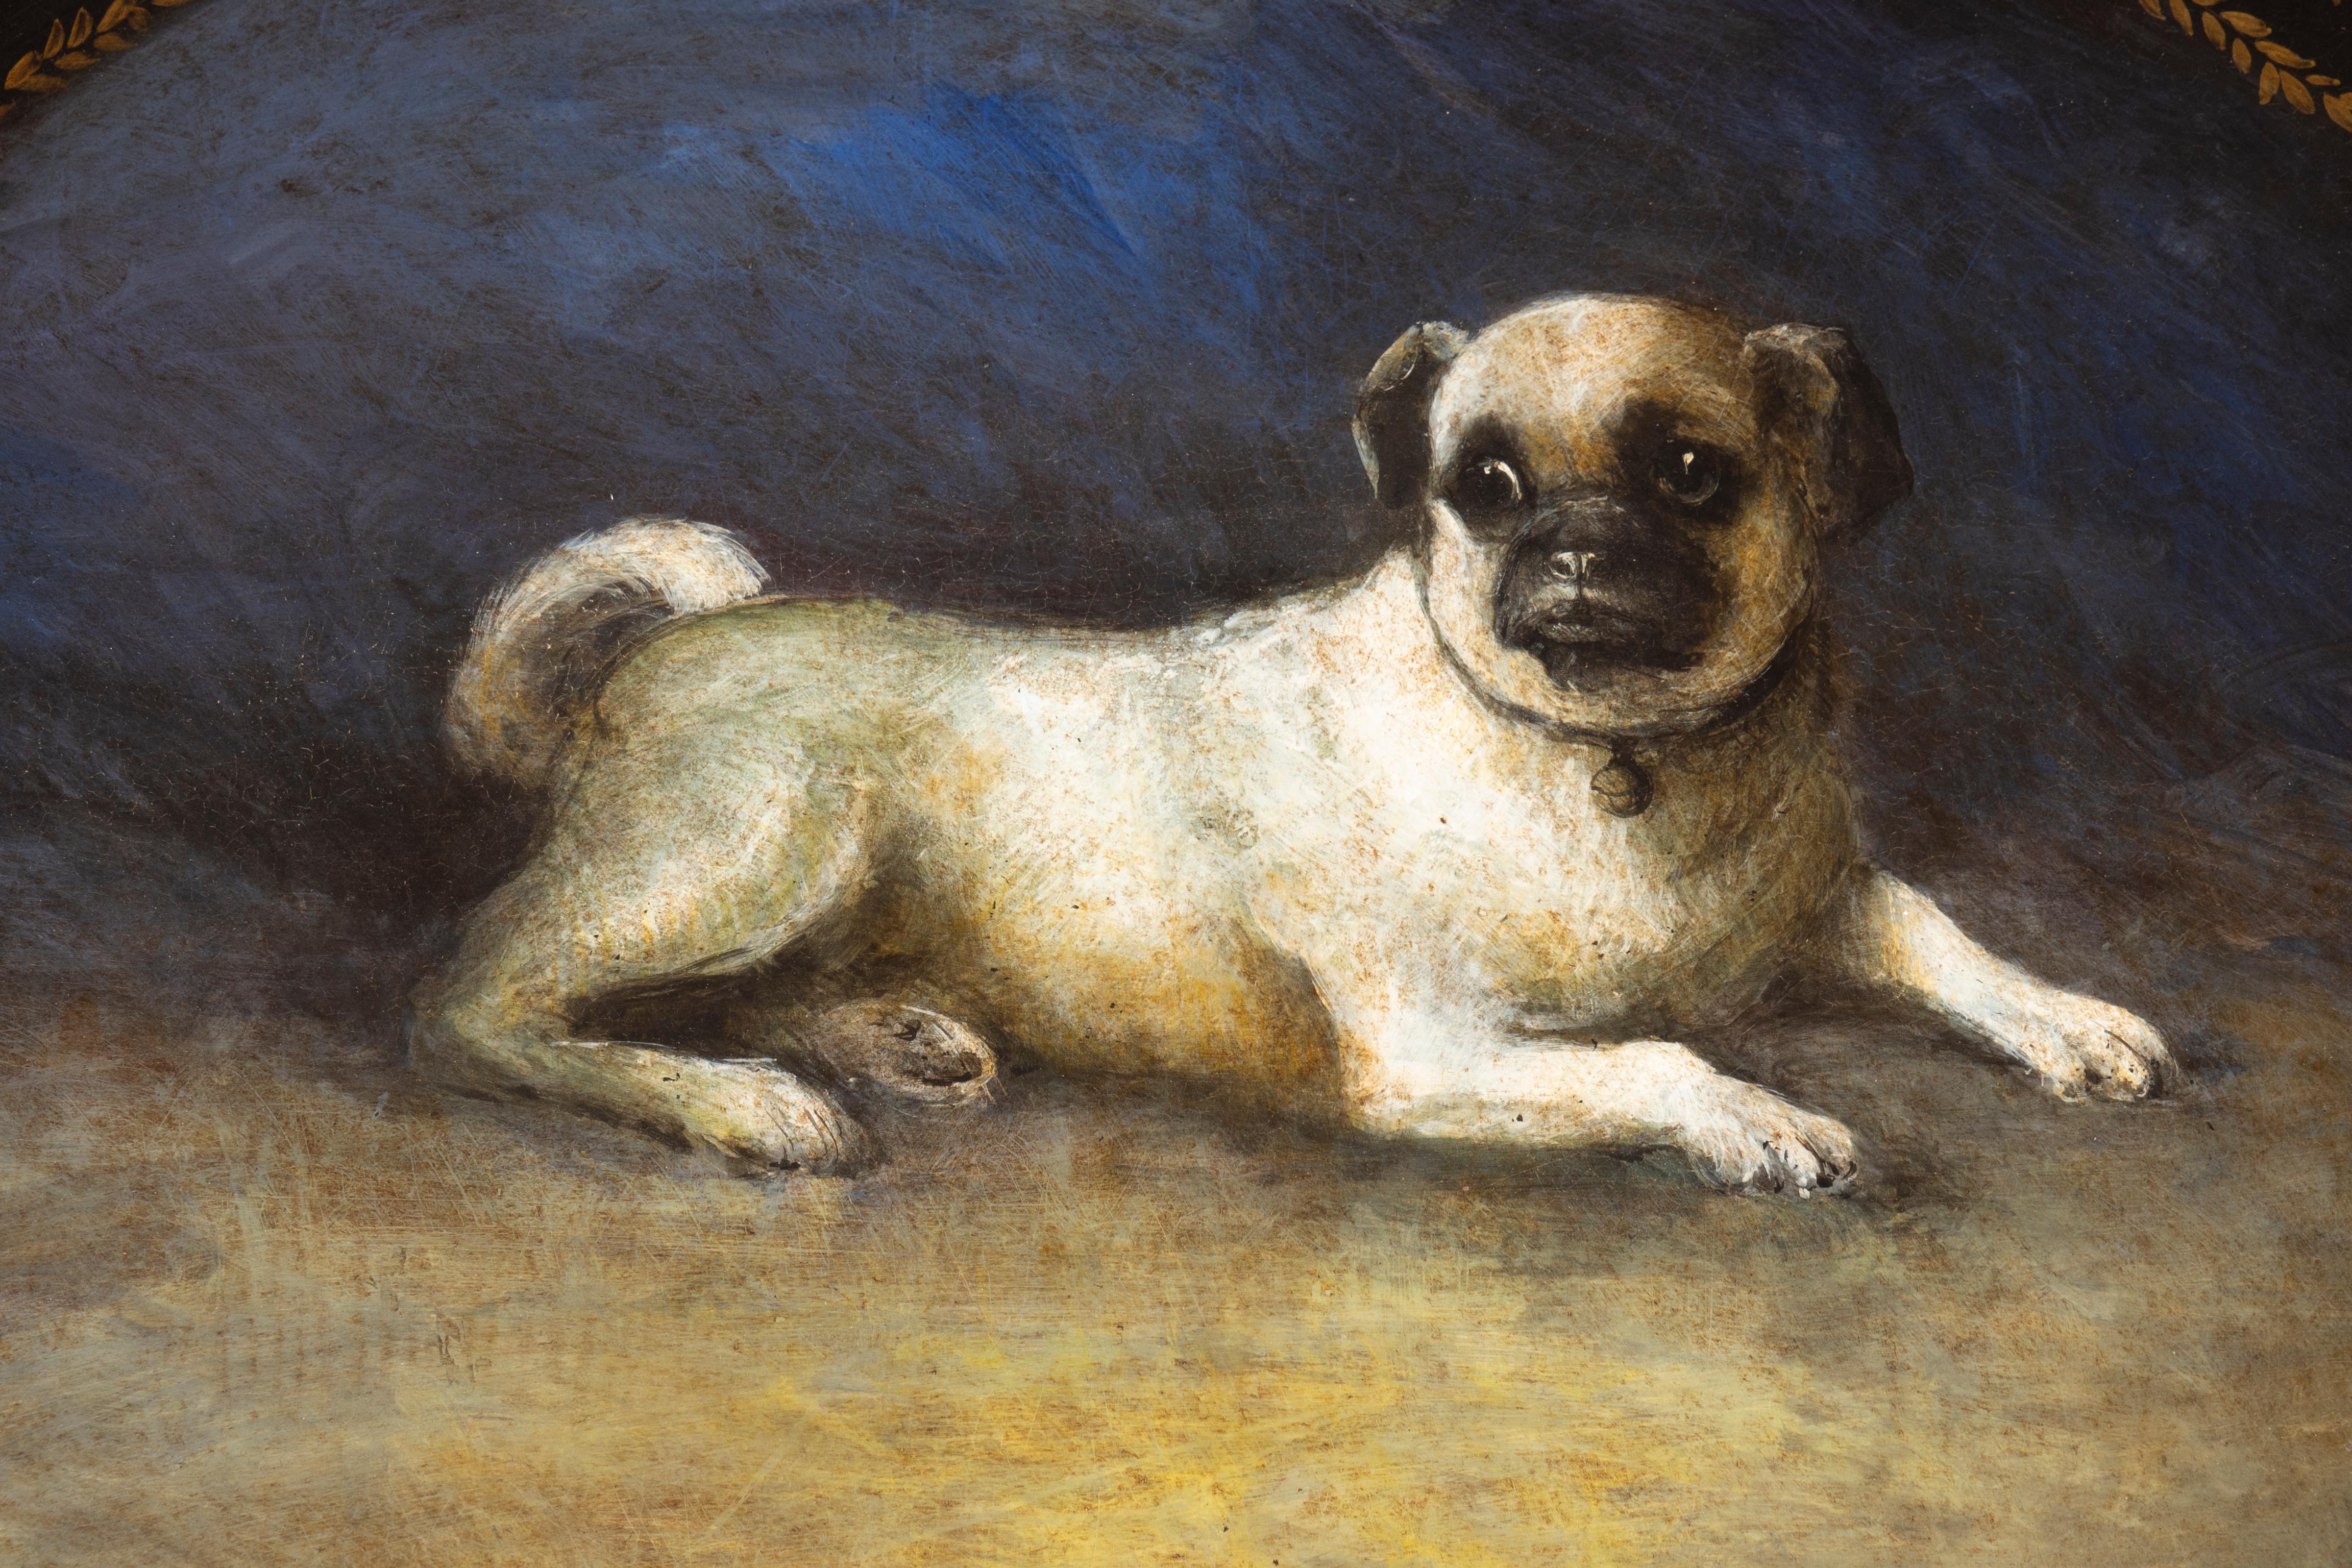 Oval with gilt edge and central painting of a pug.